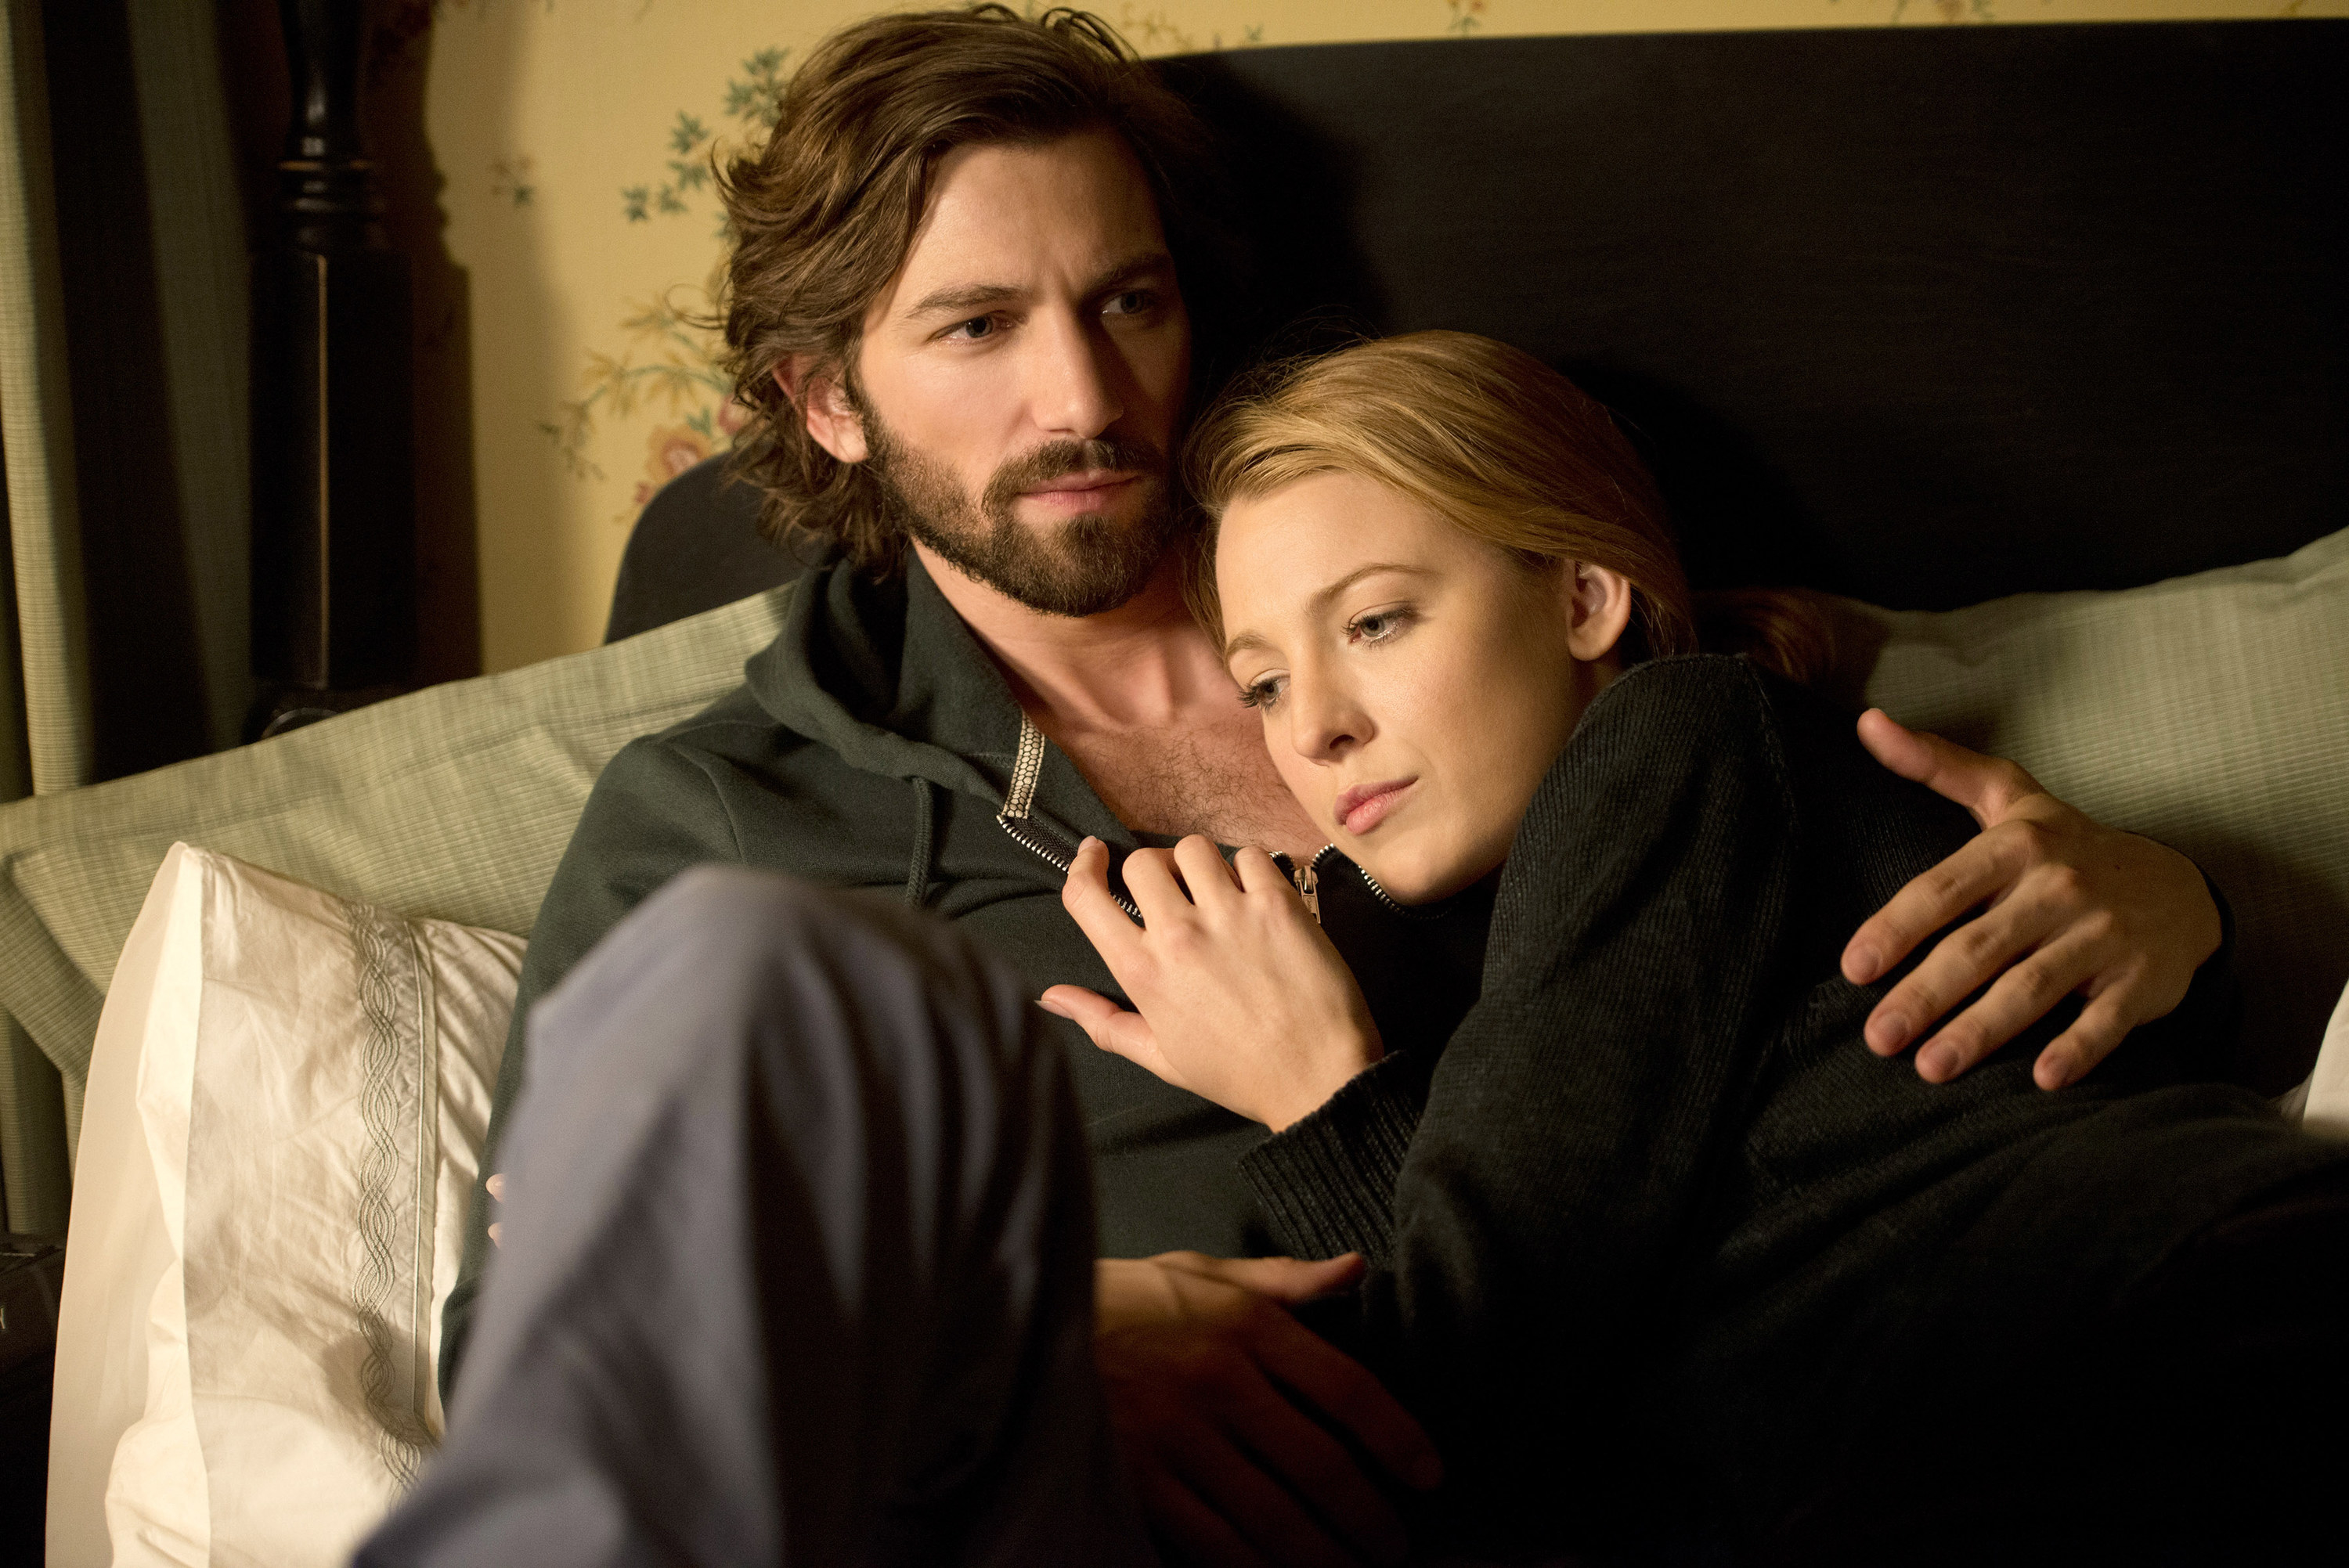 Michiel Huisman and Blake Lively embrace on a couch